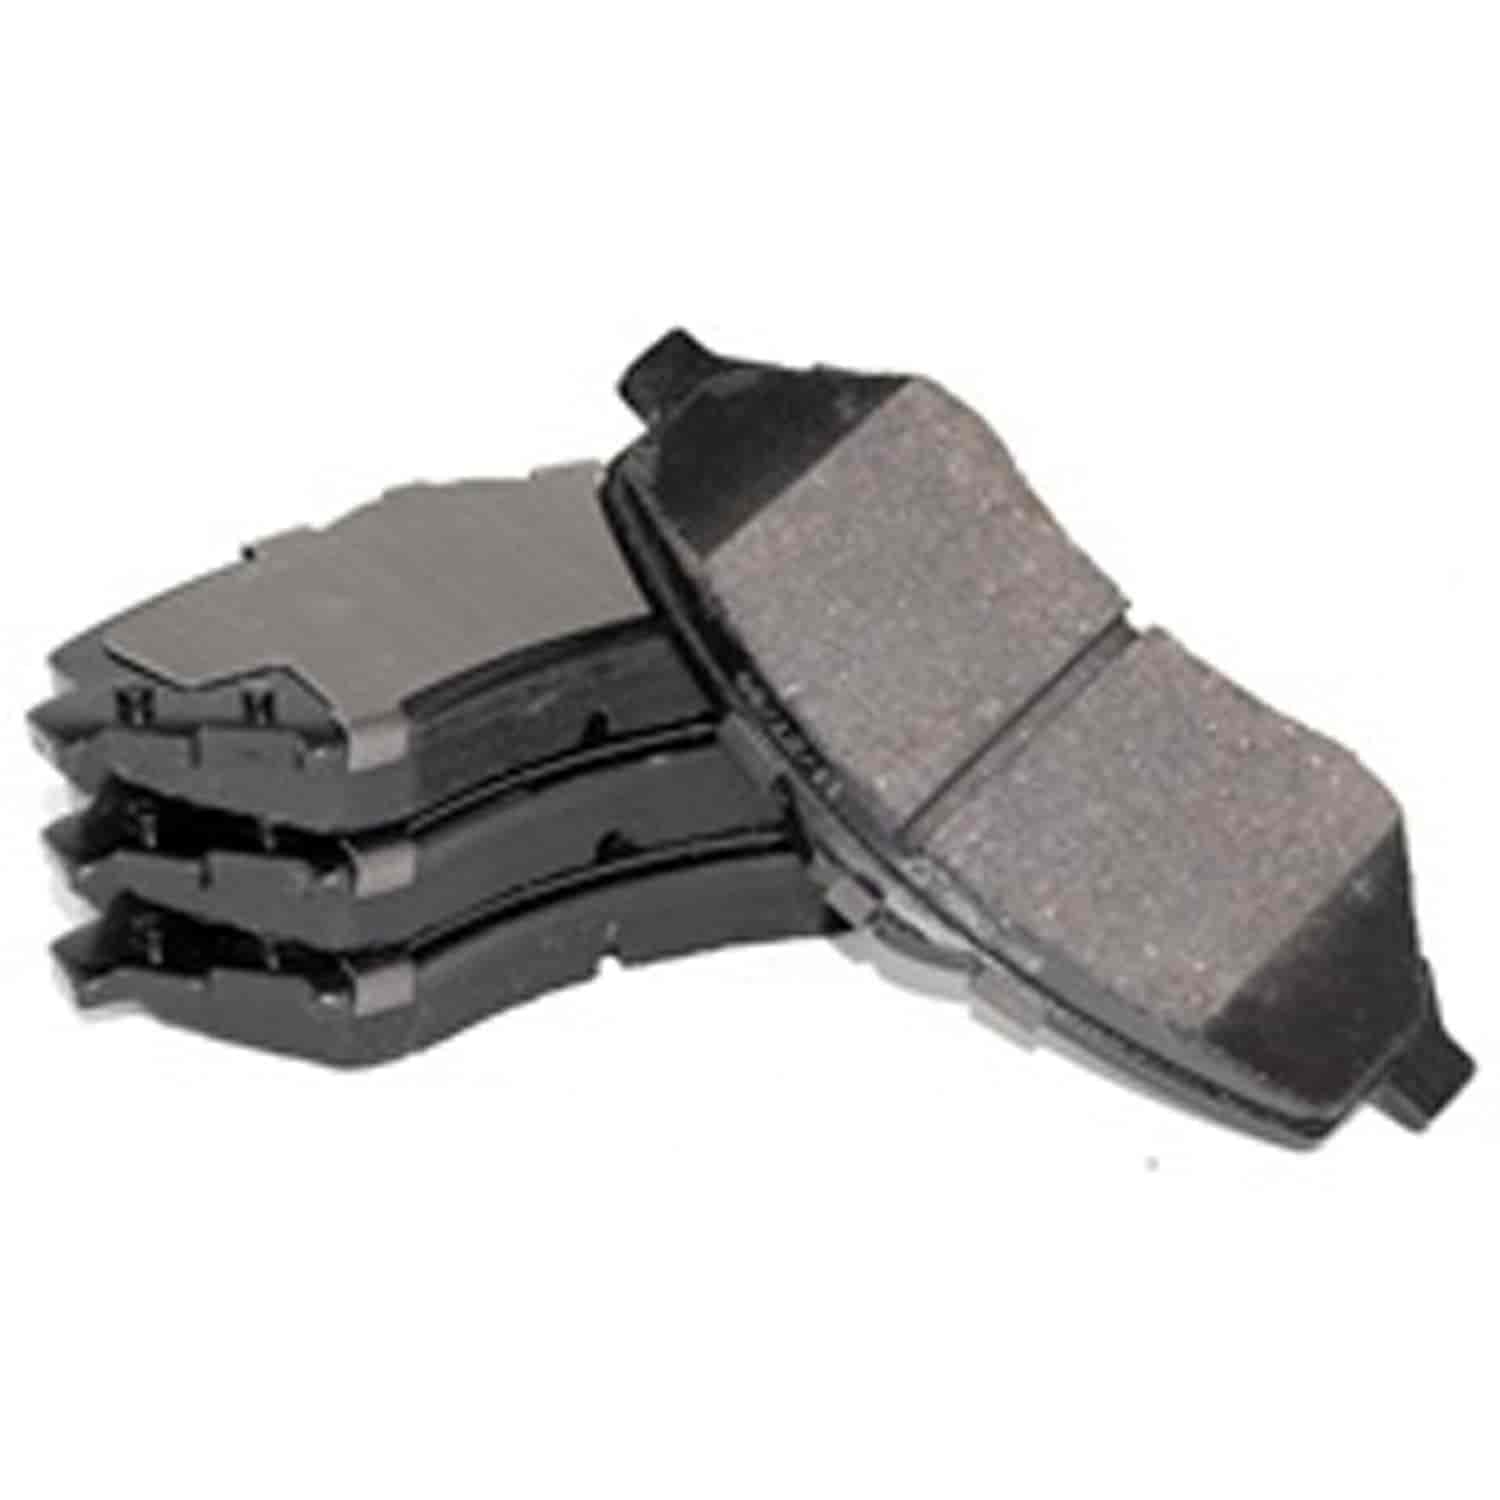 This set of front disc brake pads from Omix-ADA fit 07-10 Jeep Compass and Patriots.